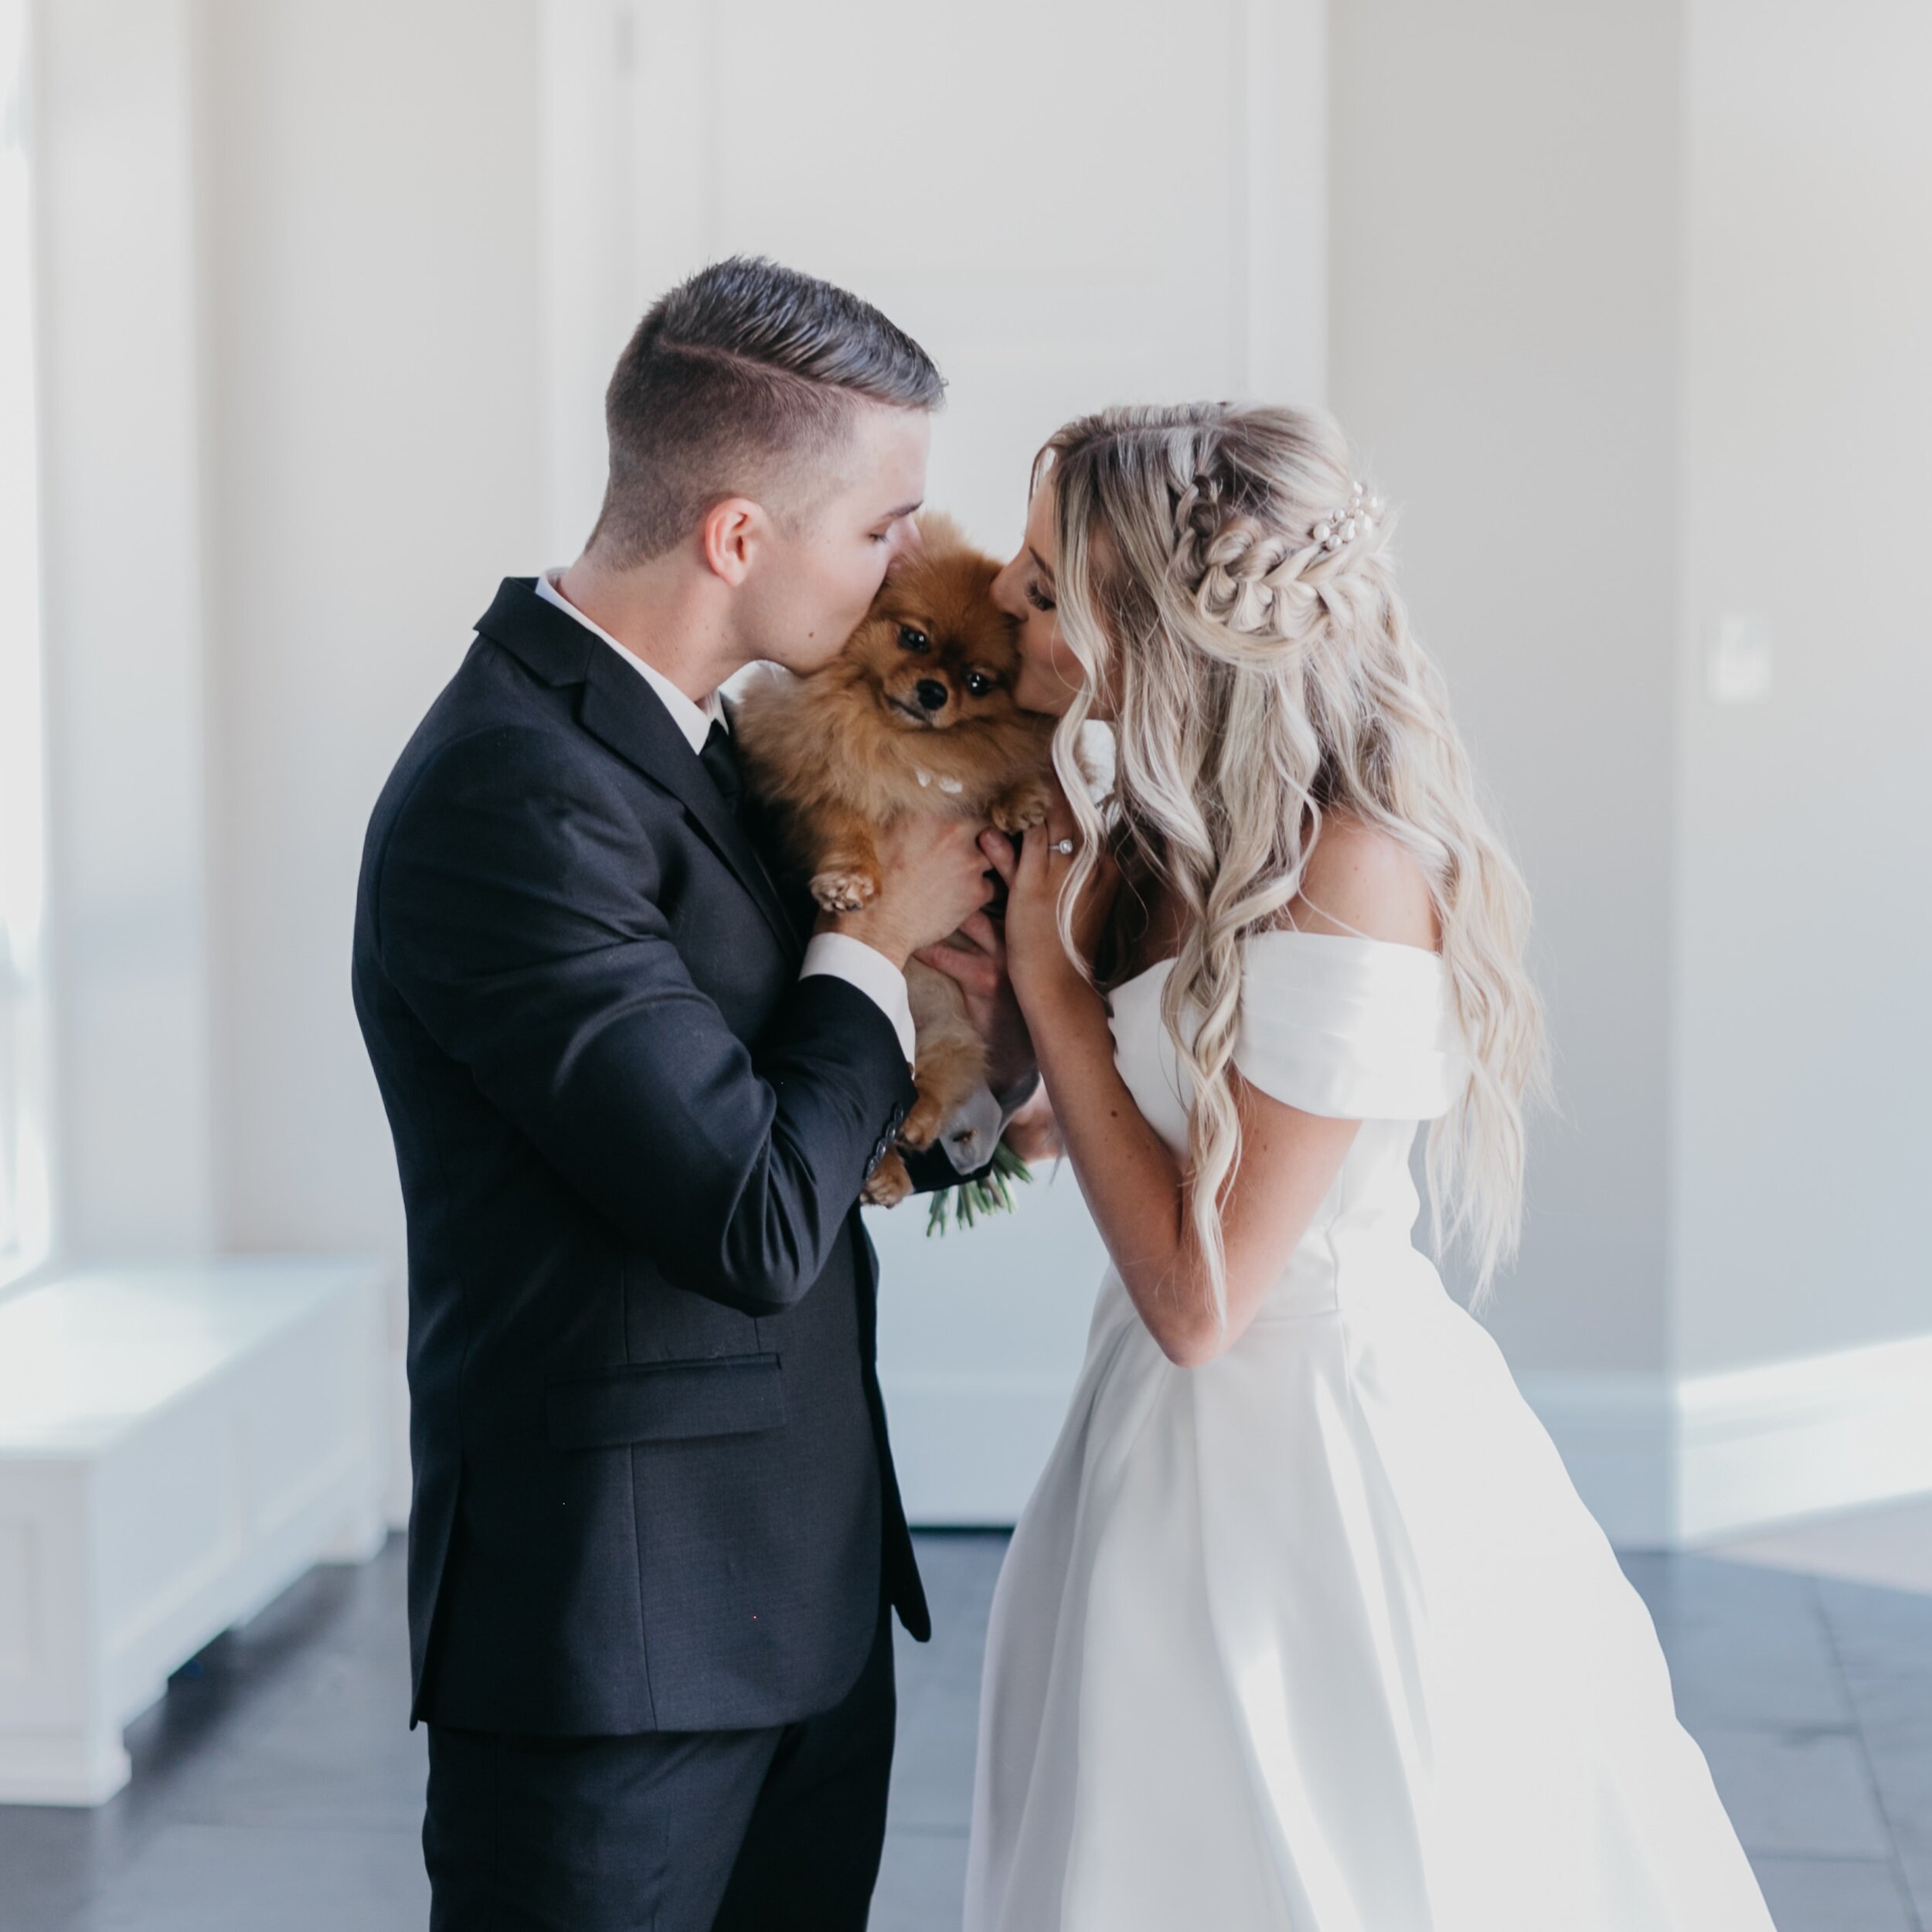 Pawsitively in love! 🐾💖 Michel and Patricia steal a sweet moment with their beloved fur baby on their joy-filled wedding day 😍.